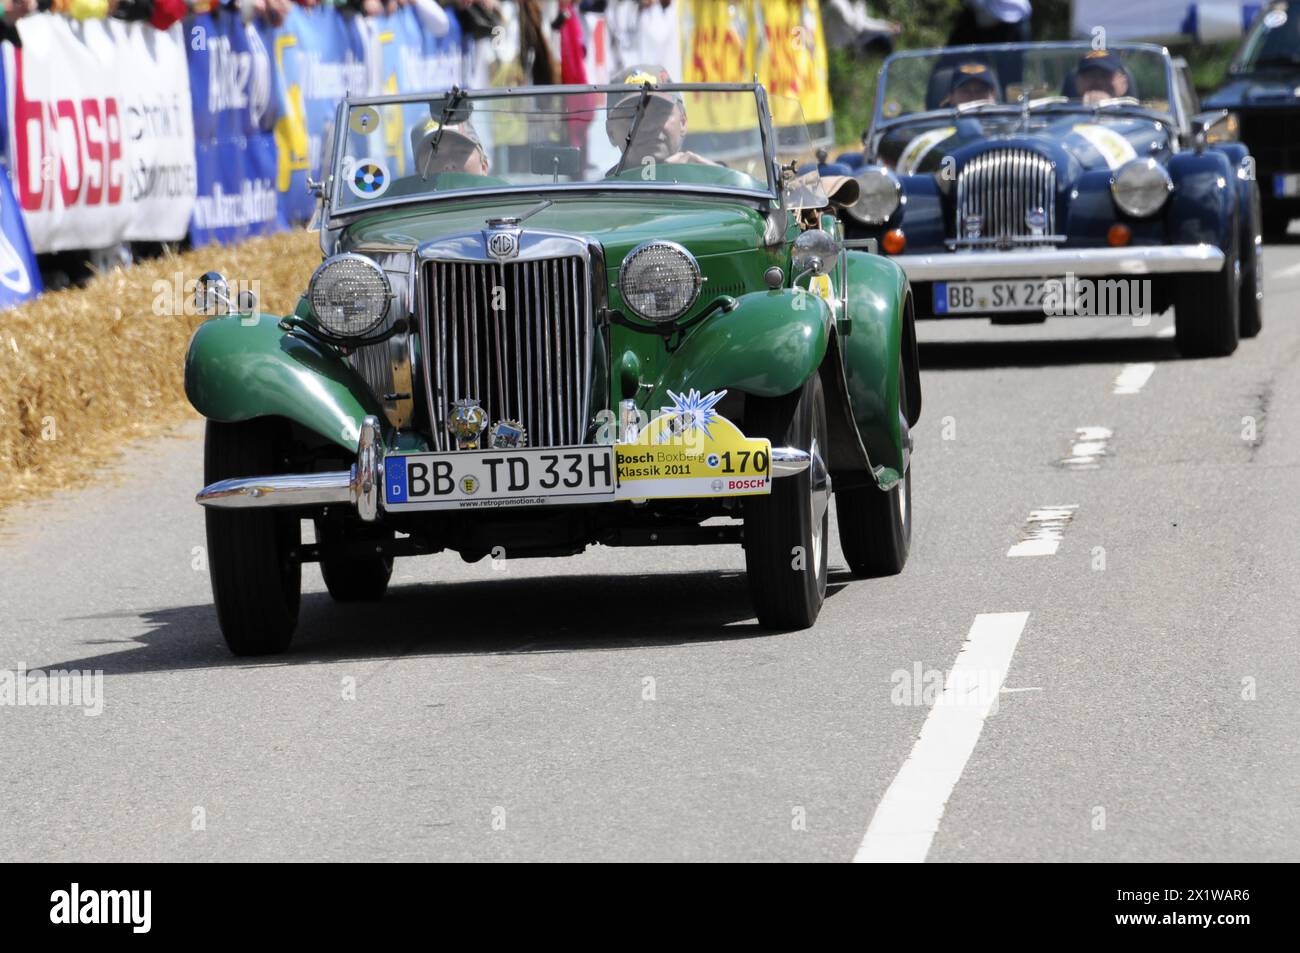 A green MG vintage car at a road race, surrounded by spectators, SOLITUDE REVIVAL 2011, Stuttgart, Baden-Wuerttemberg, Germany Stock Photo